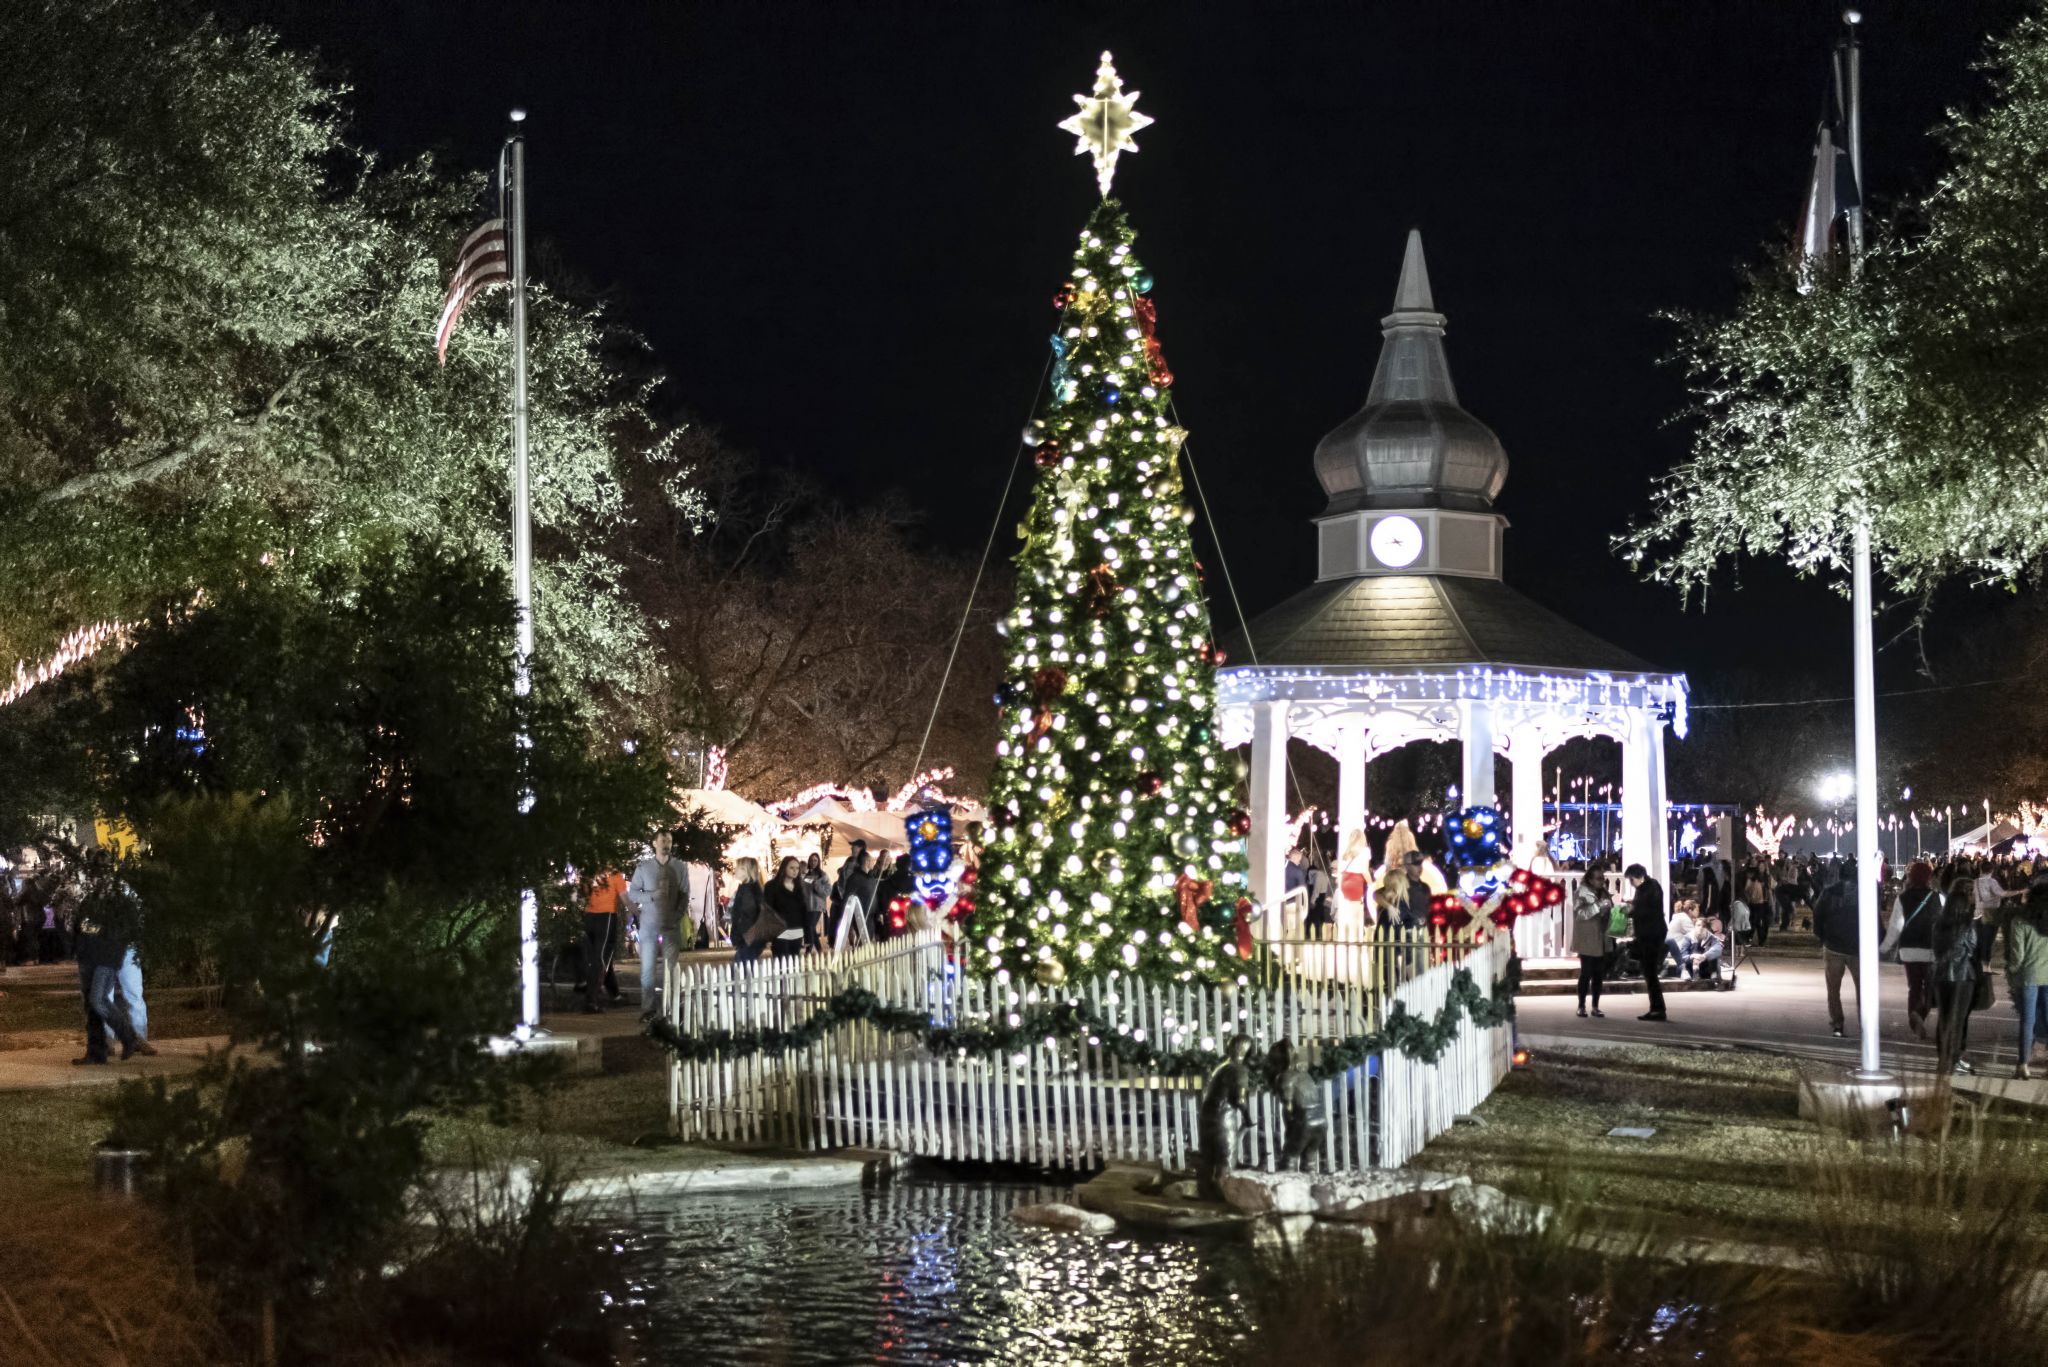 Enjoy a vintage Victorian holiday at Boerne’s Dickens on Main